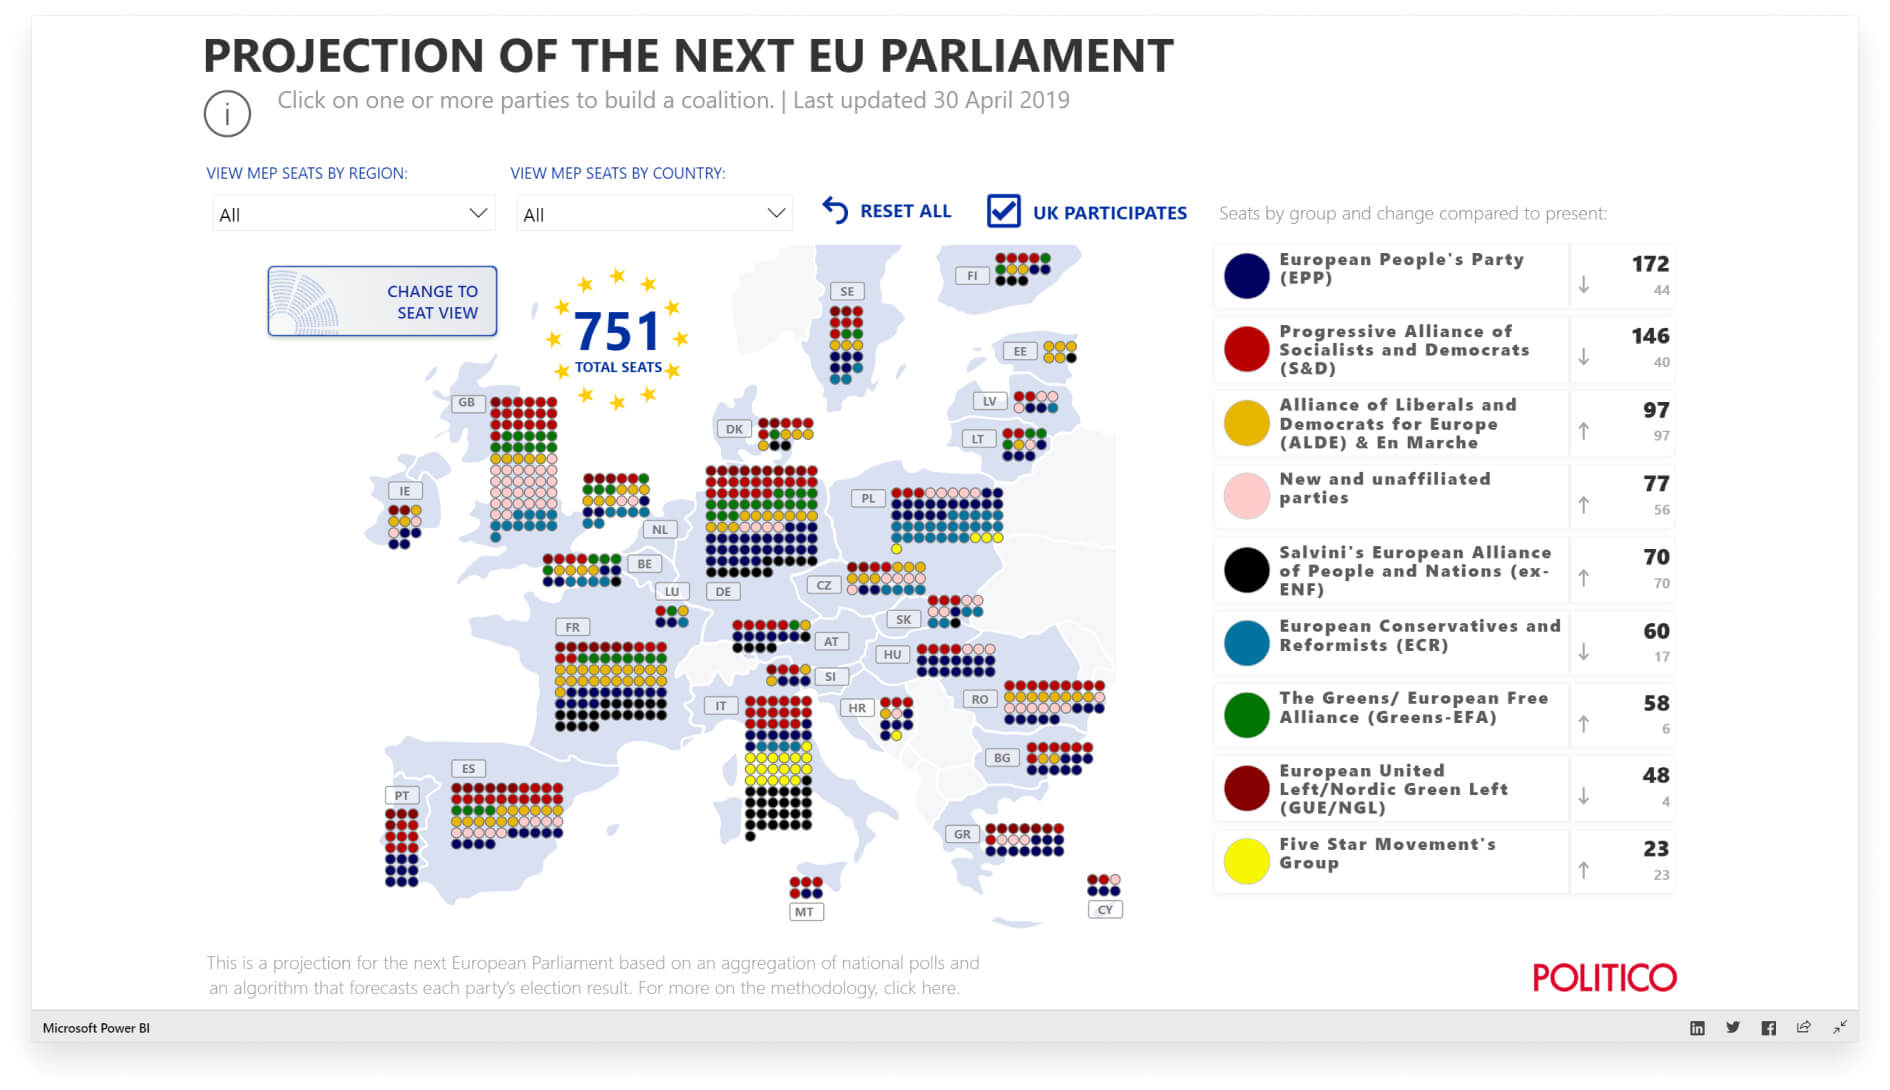 Power B I being used to present the E U parliament election projections